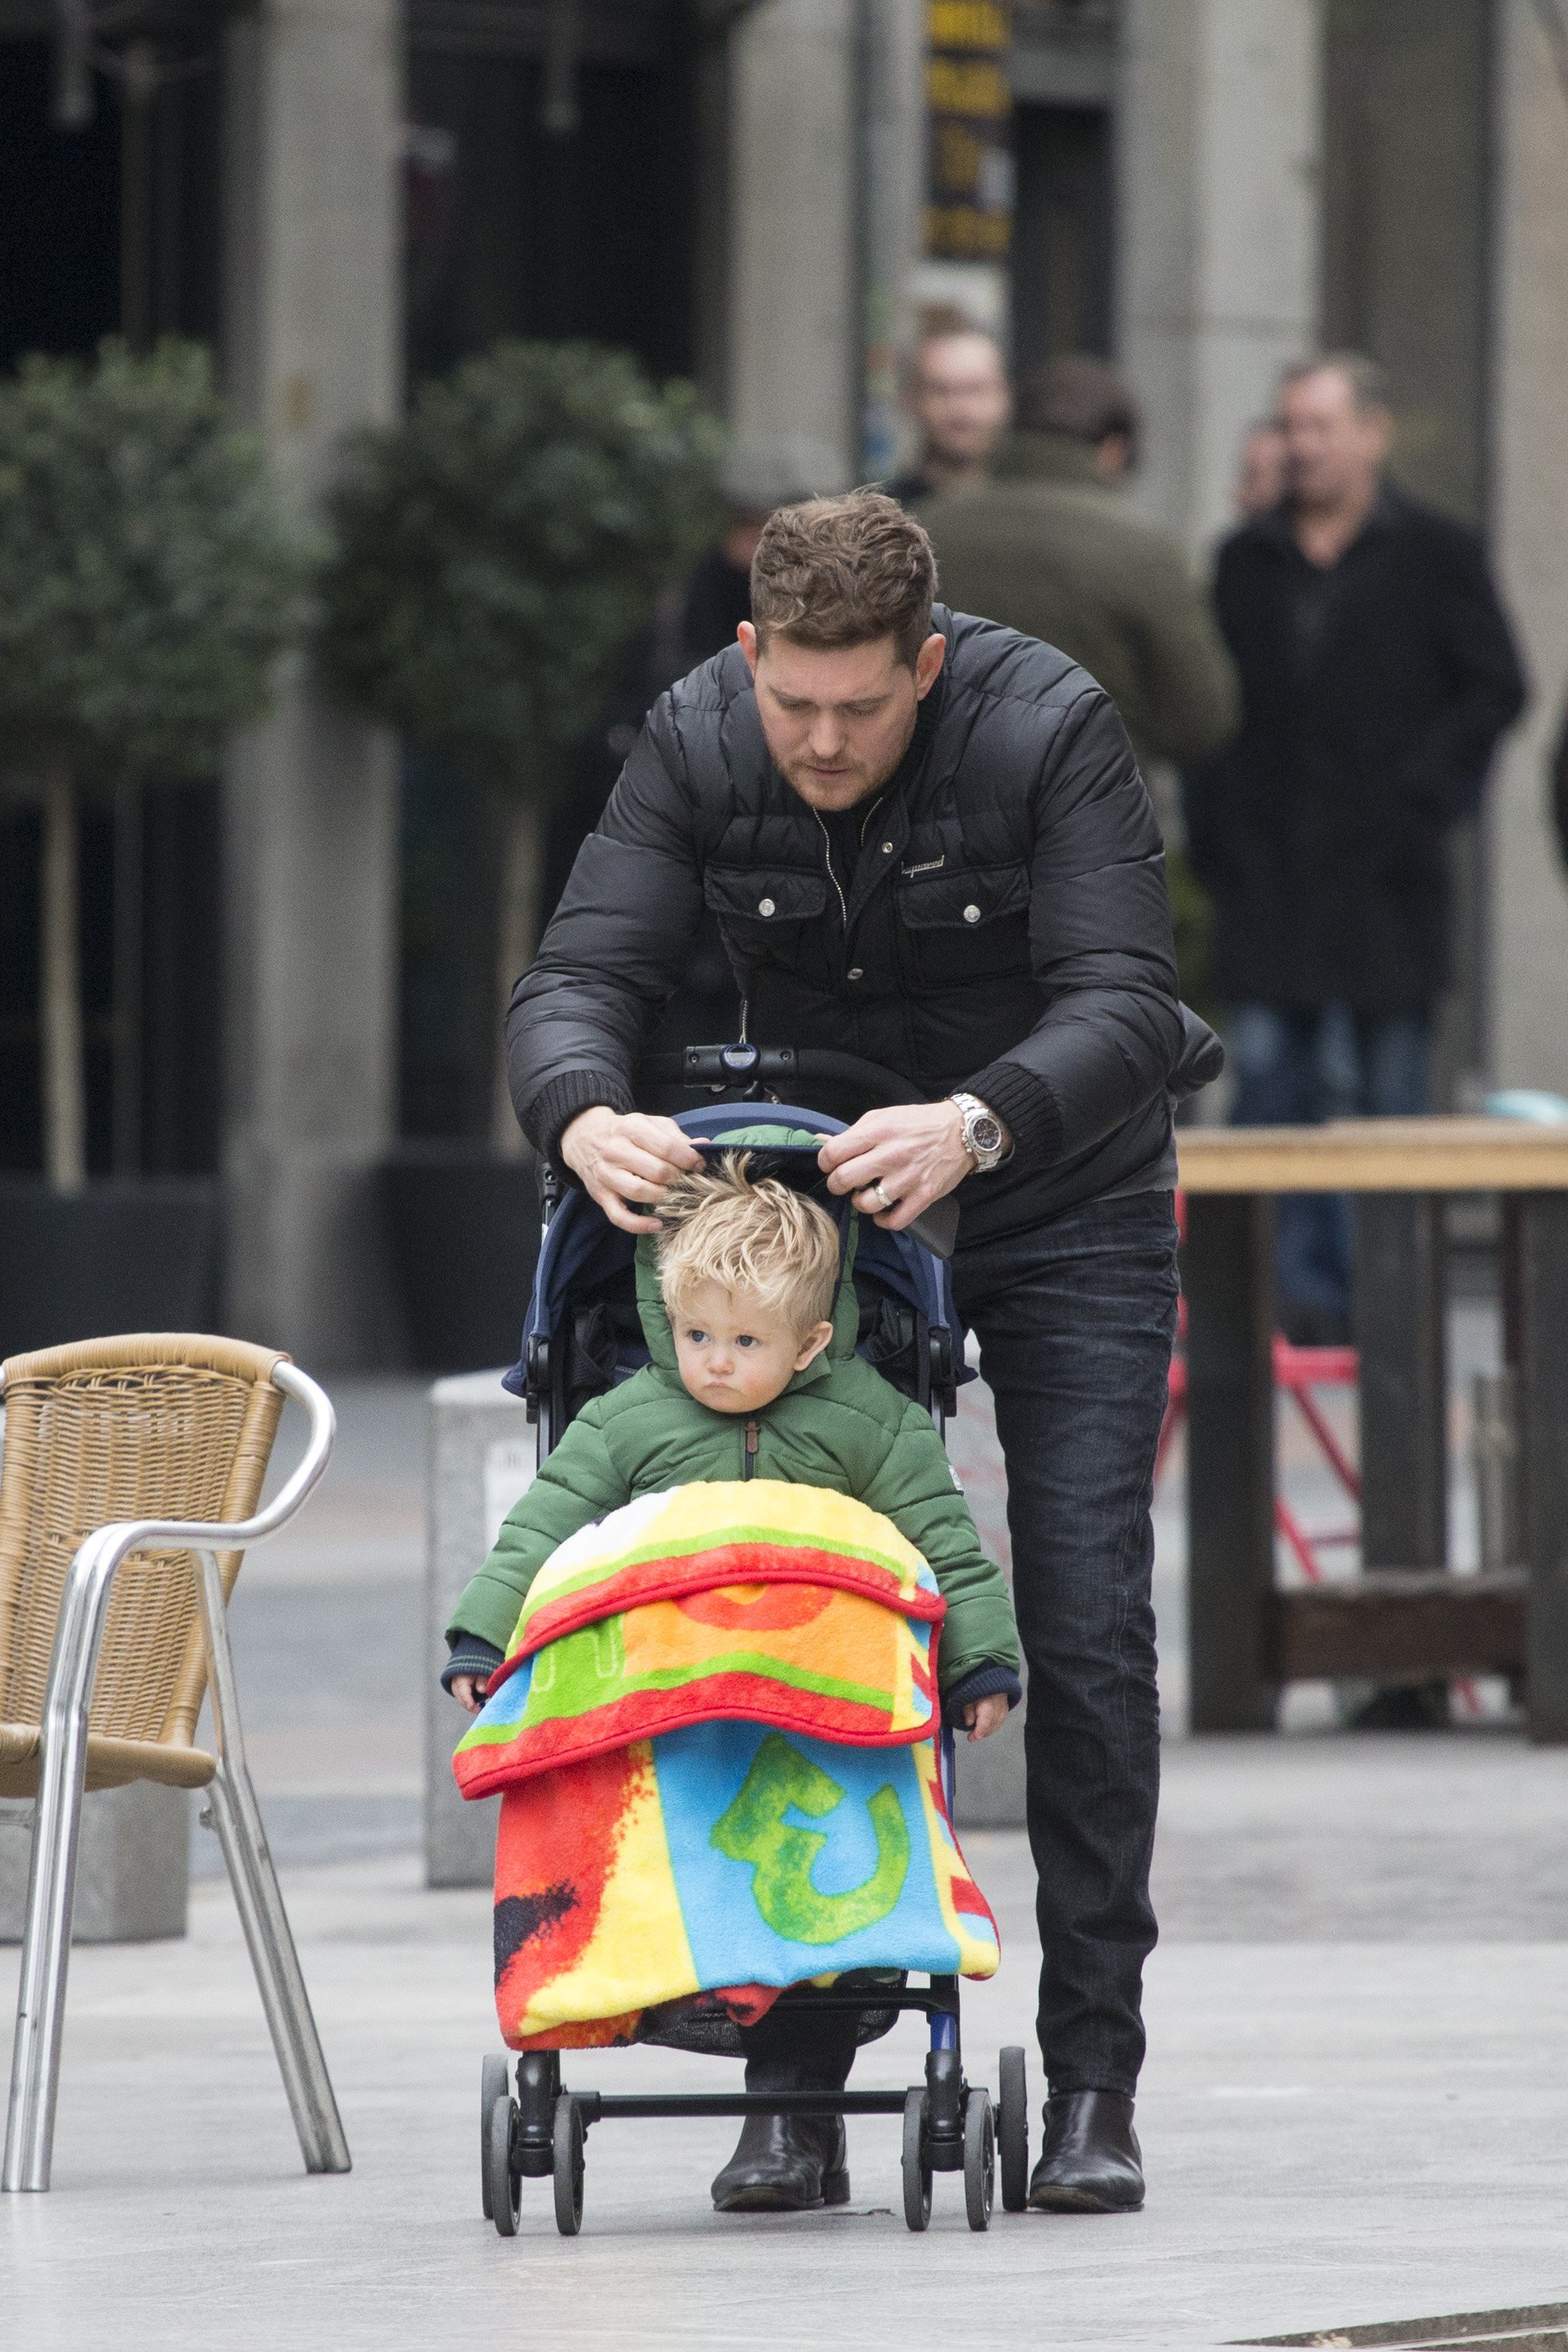 Michael Buble strolling with his son Noah on February 12, 2015, in Madrid, Spain. | Source: Iconic/GC Images/Getty Images